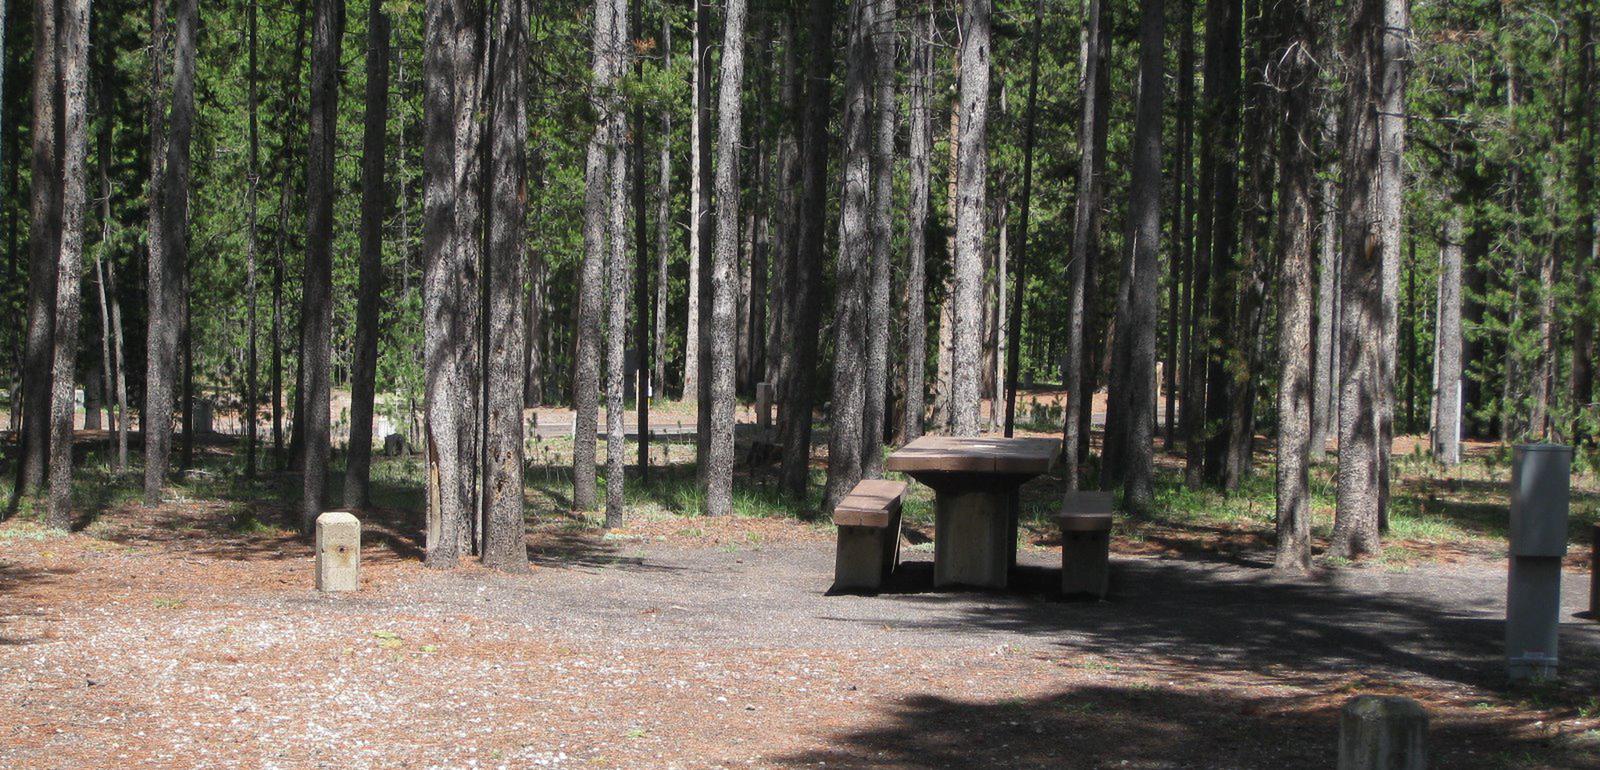 Site C11, surrounded by pine trees, picnic table & fire ringSite C11